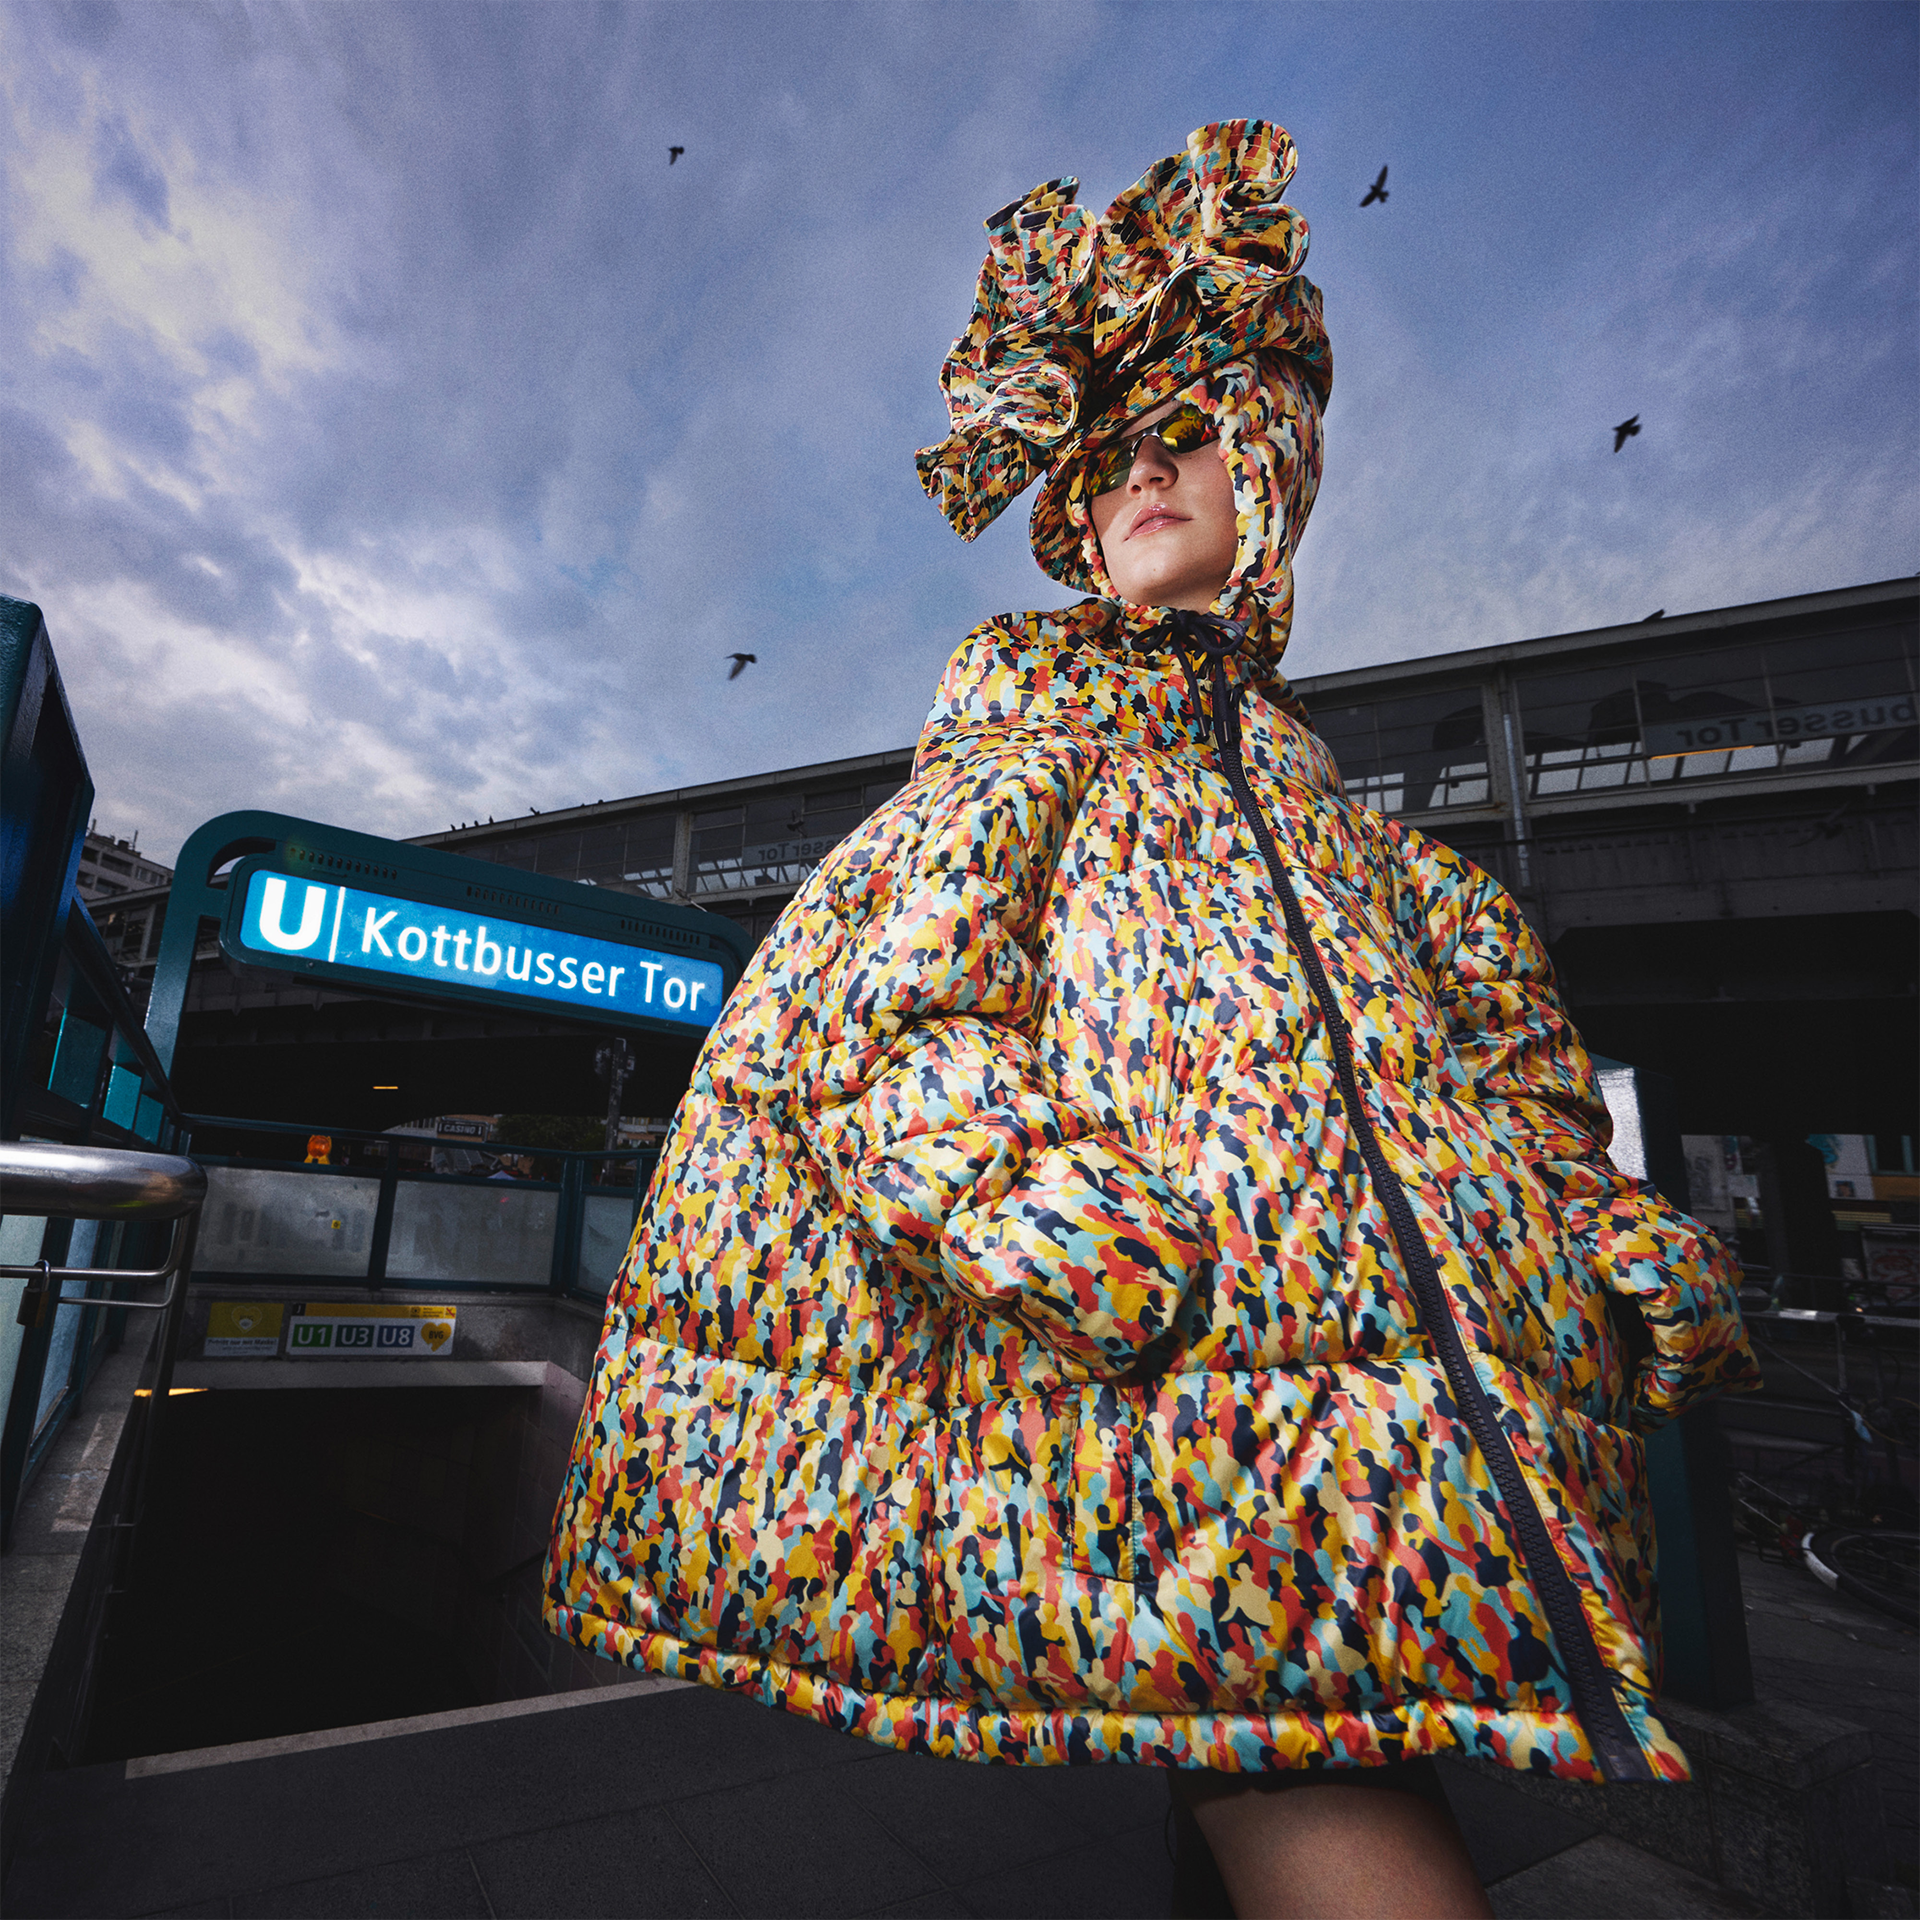 A woman stands in front of the train station kottbusser tor and wears an oversized jacket in the so-called Pattern of Tolerance of Jung von Matt’s Campaign for BVG, Berlin’s public transport company.